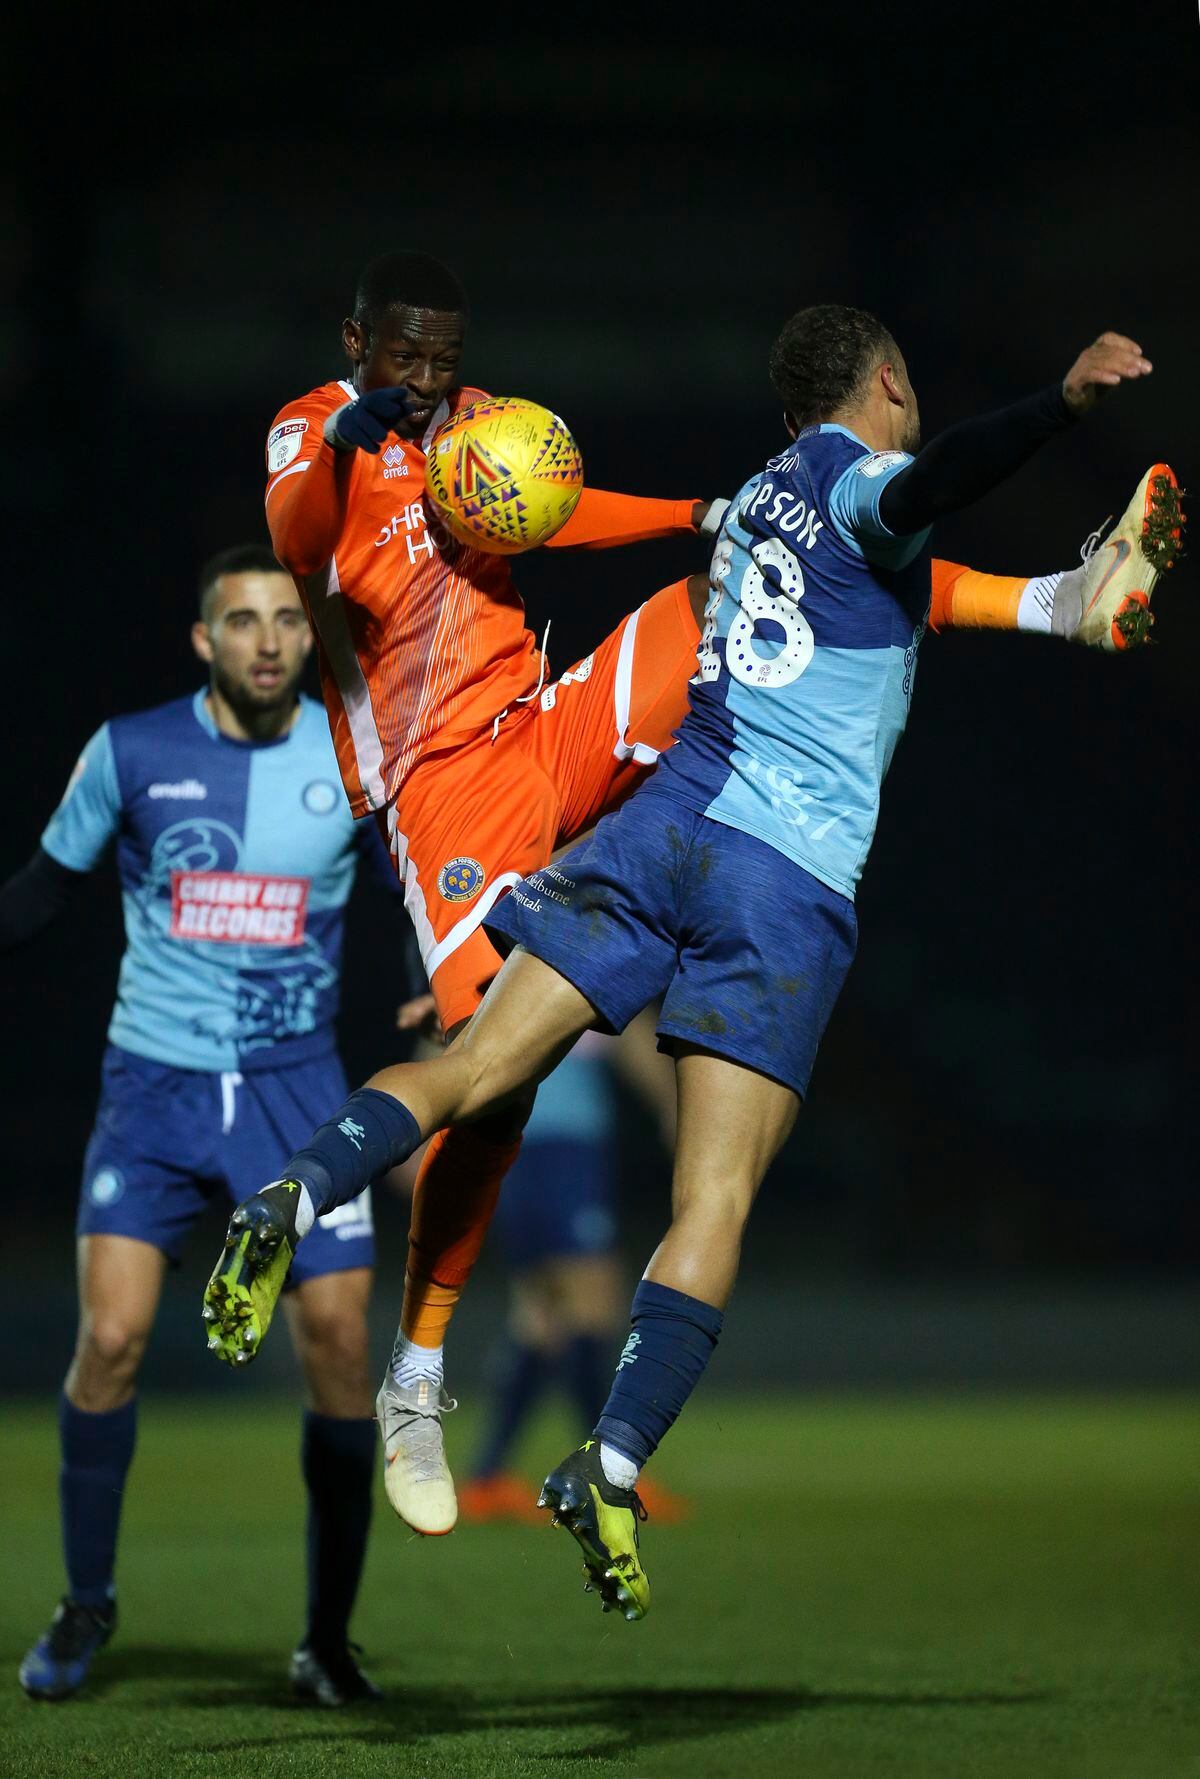 Abo Eisa of Shrewsbury Town and Curtis Thompson of Wycombe Wanderers. (AMA)